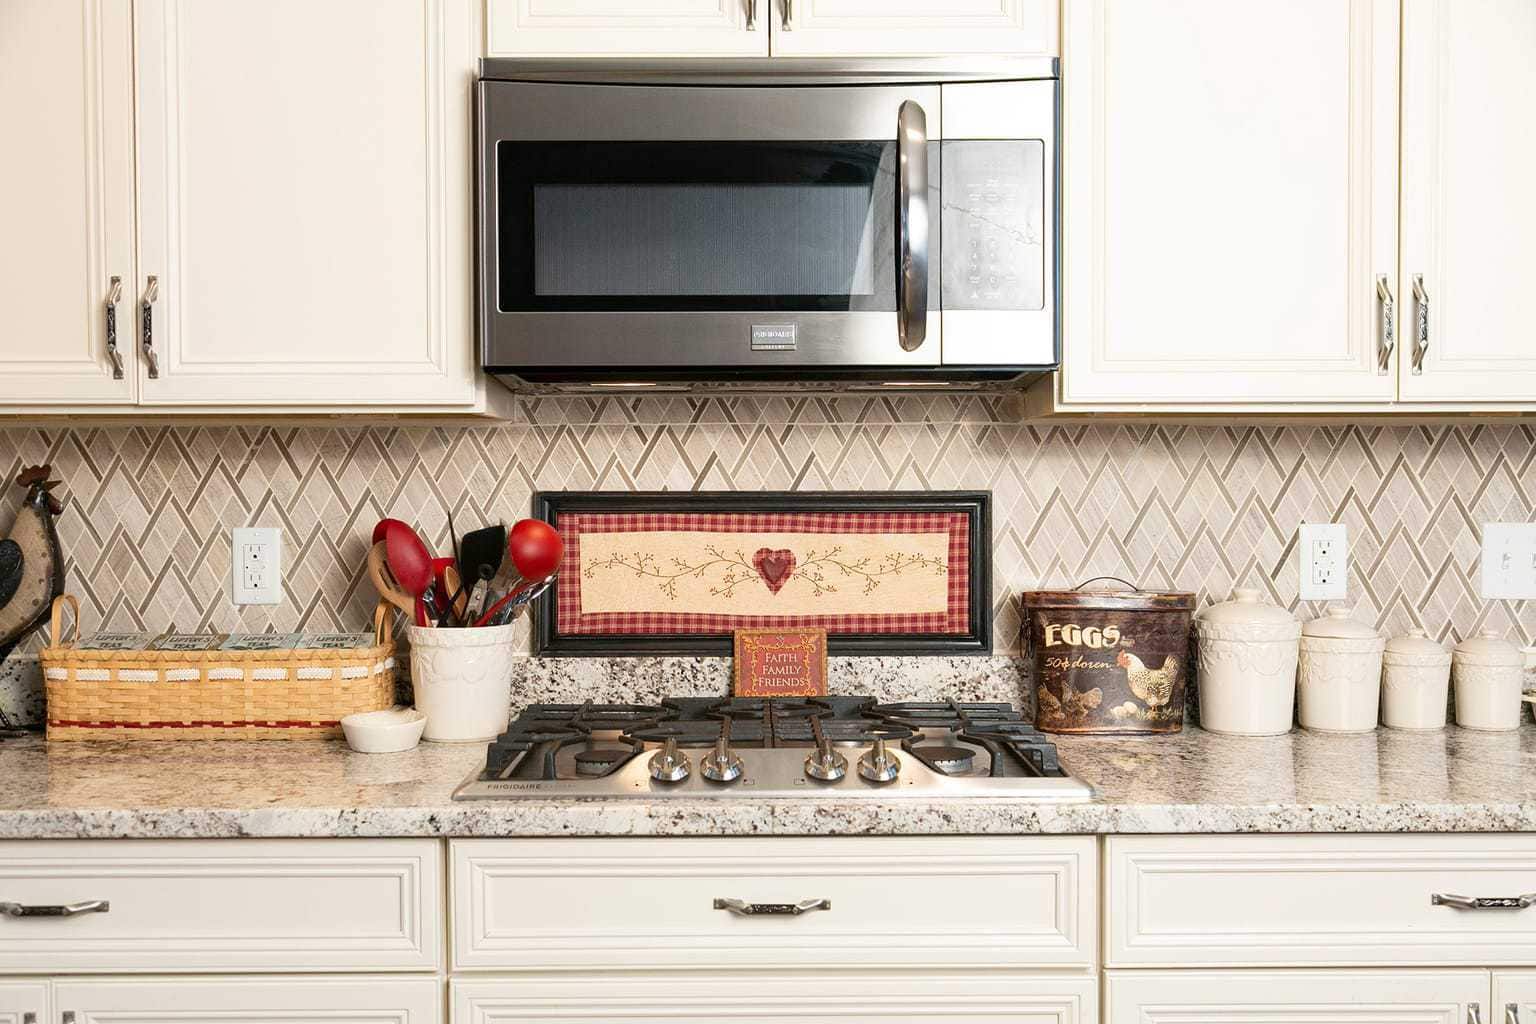 Kitchen Tile Backsplash Ideas That Are Easy and Inexpensive